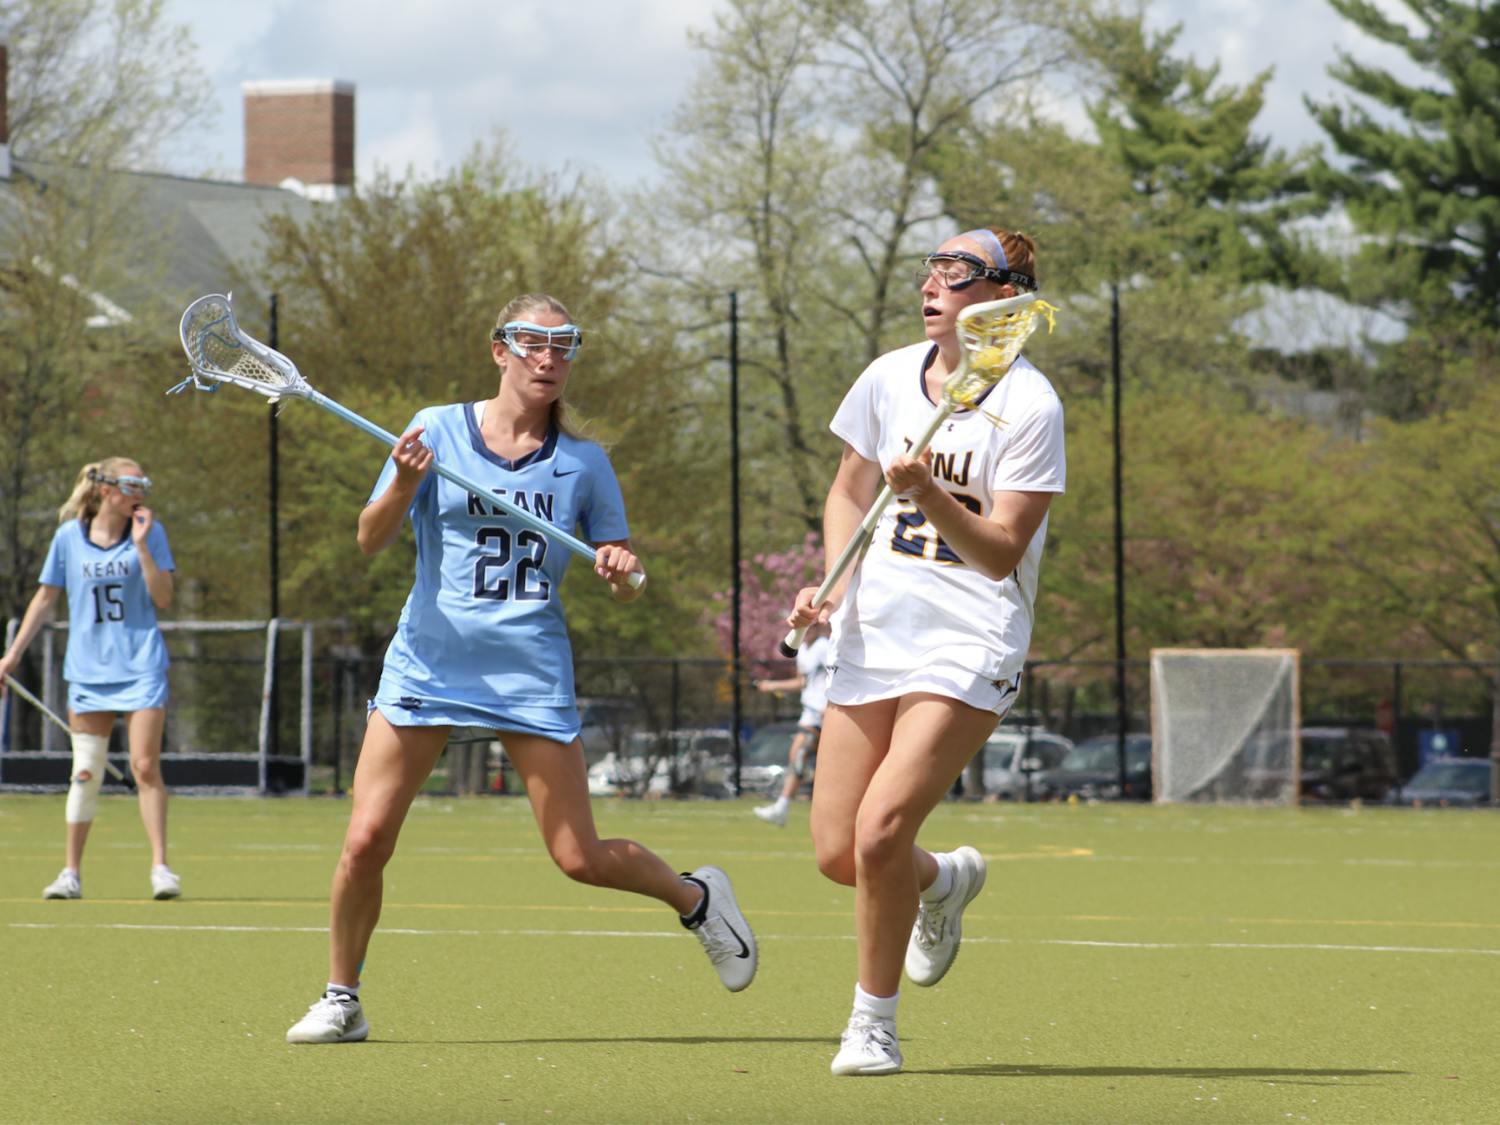 The Lions had their final regular season home game against Kean University this past Saturday, April 15, where the College got the job done 14-2 (only three quarters played due to weather conditions). Senior featured: Anna Devlin. (Photo courtesy of Elizabeth Gladstone / Photo Editor)
